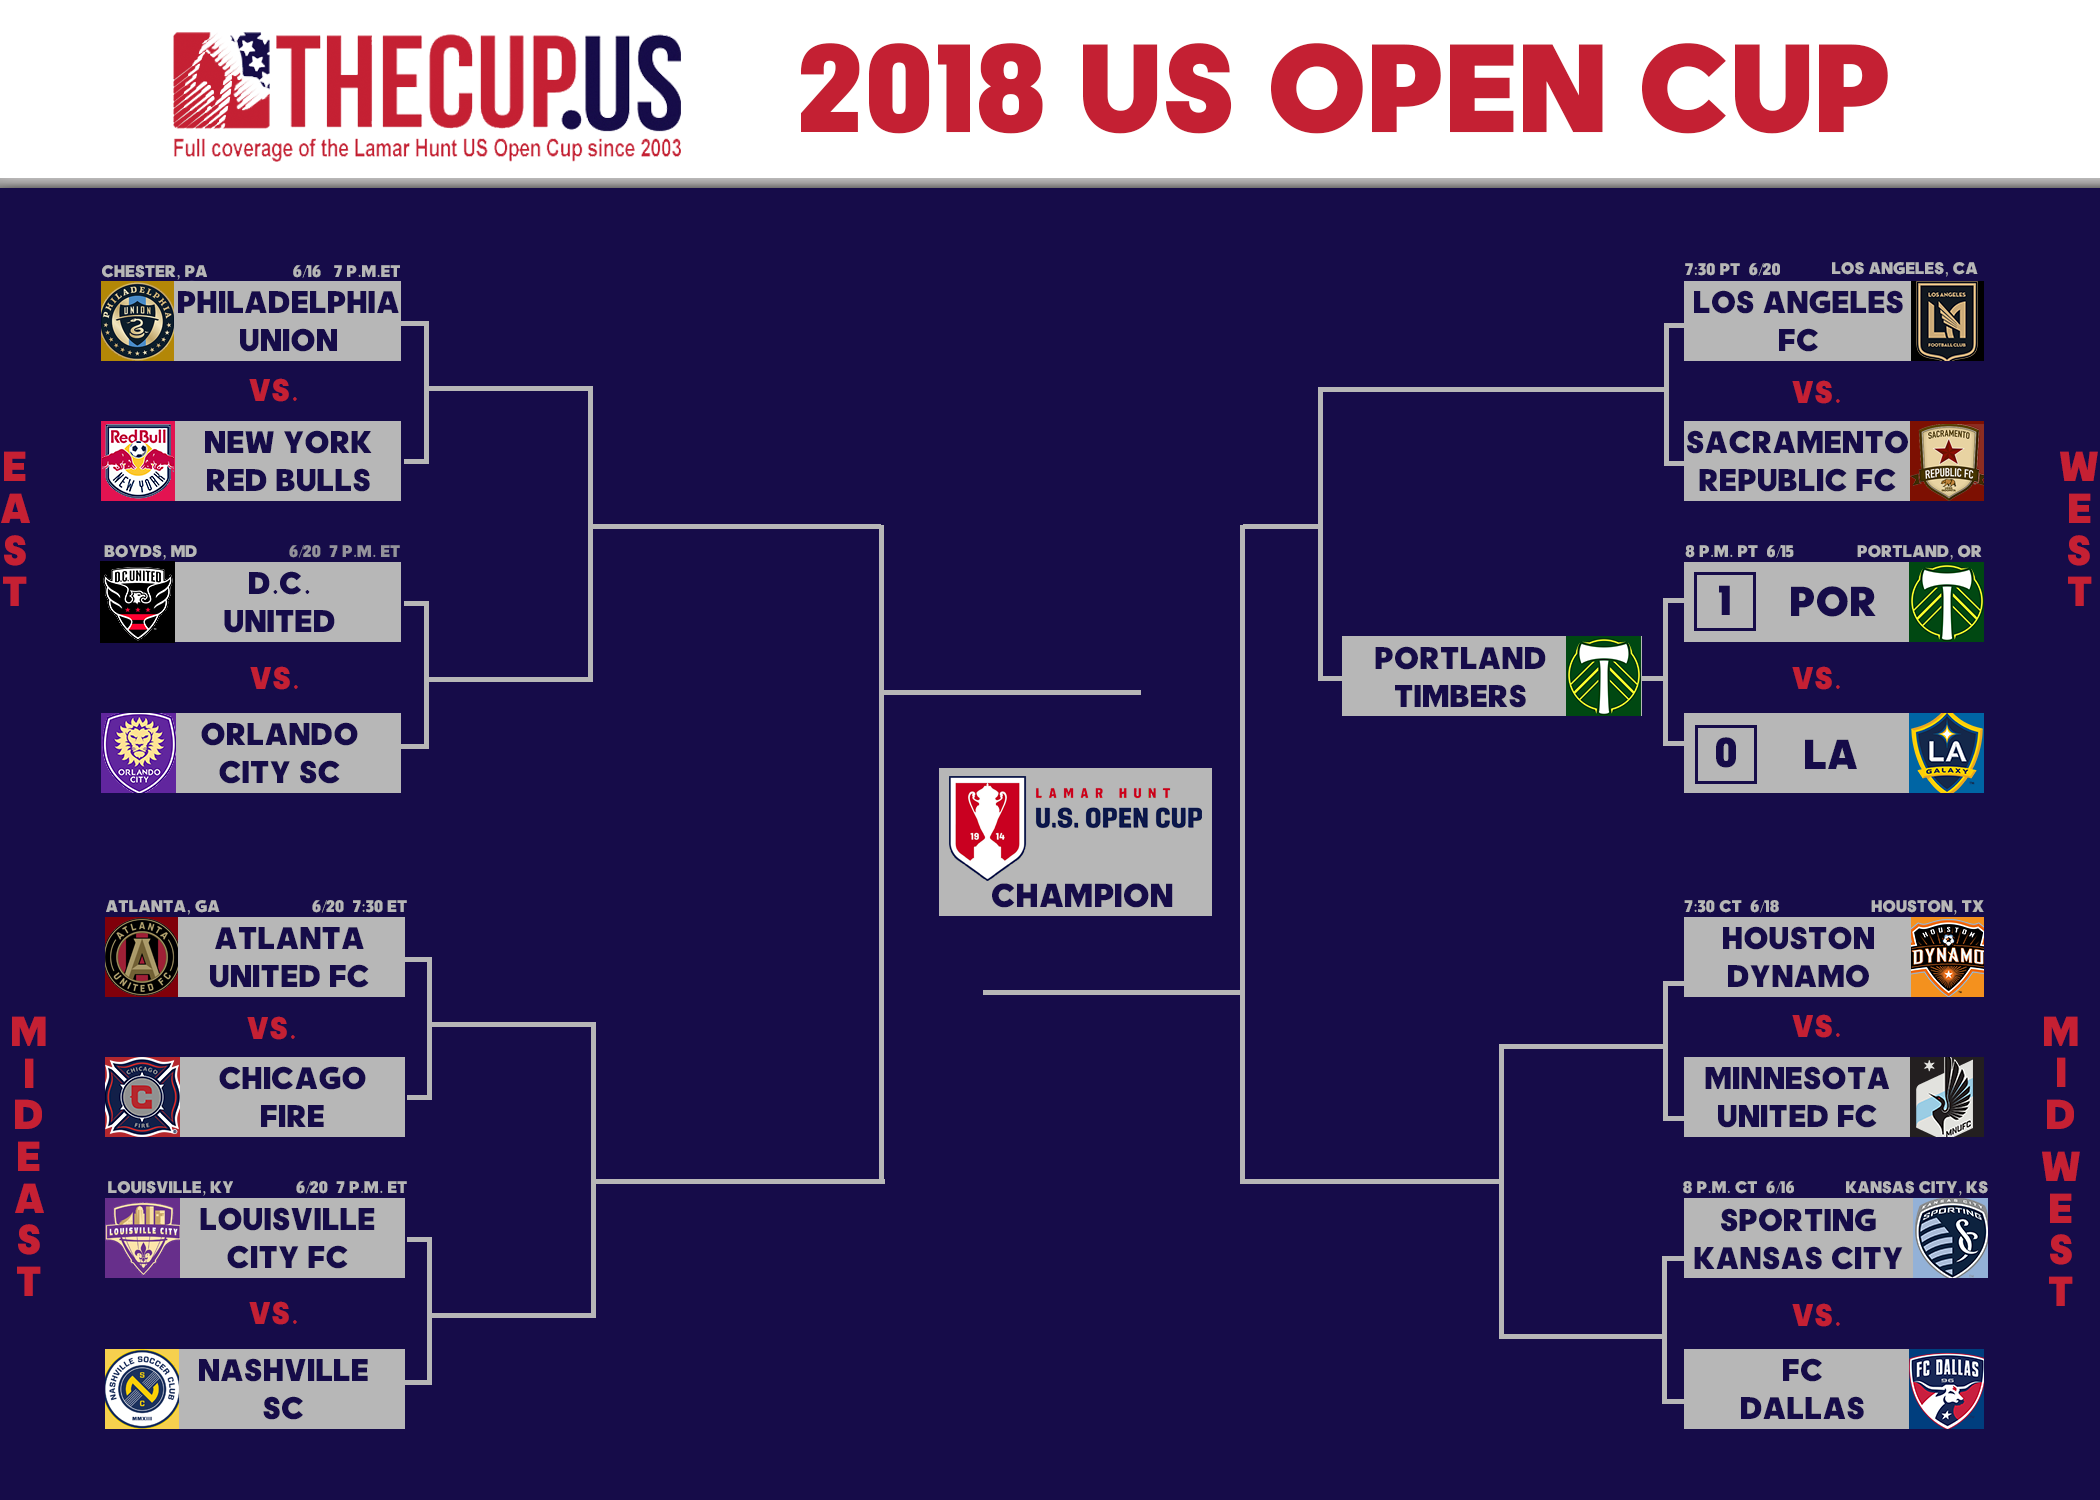 2018 US Open Cup Round 5 preview Round of 16 continues with two